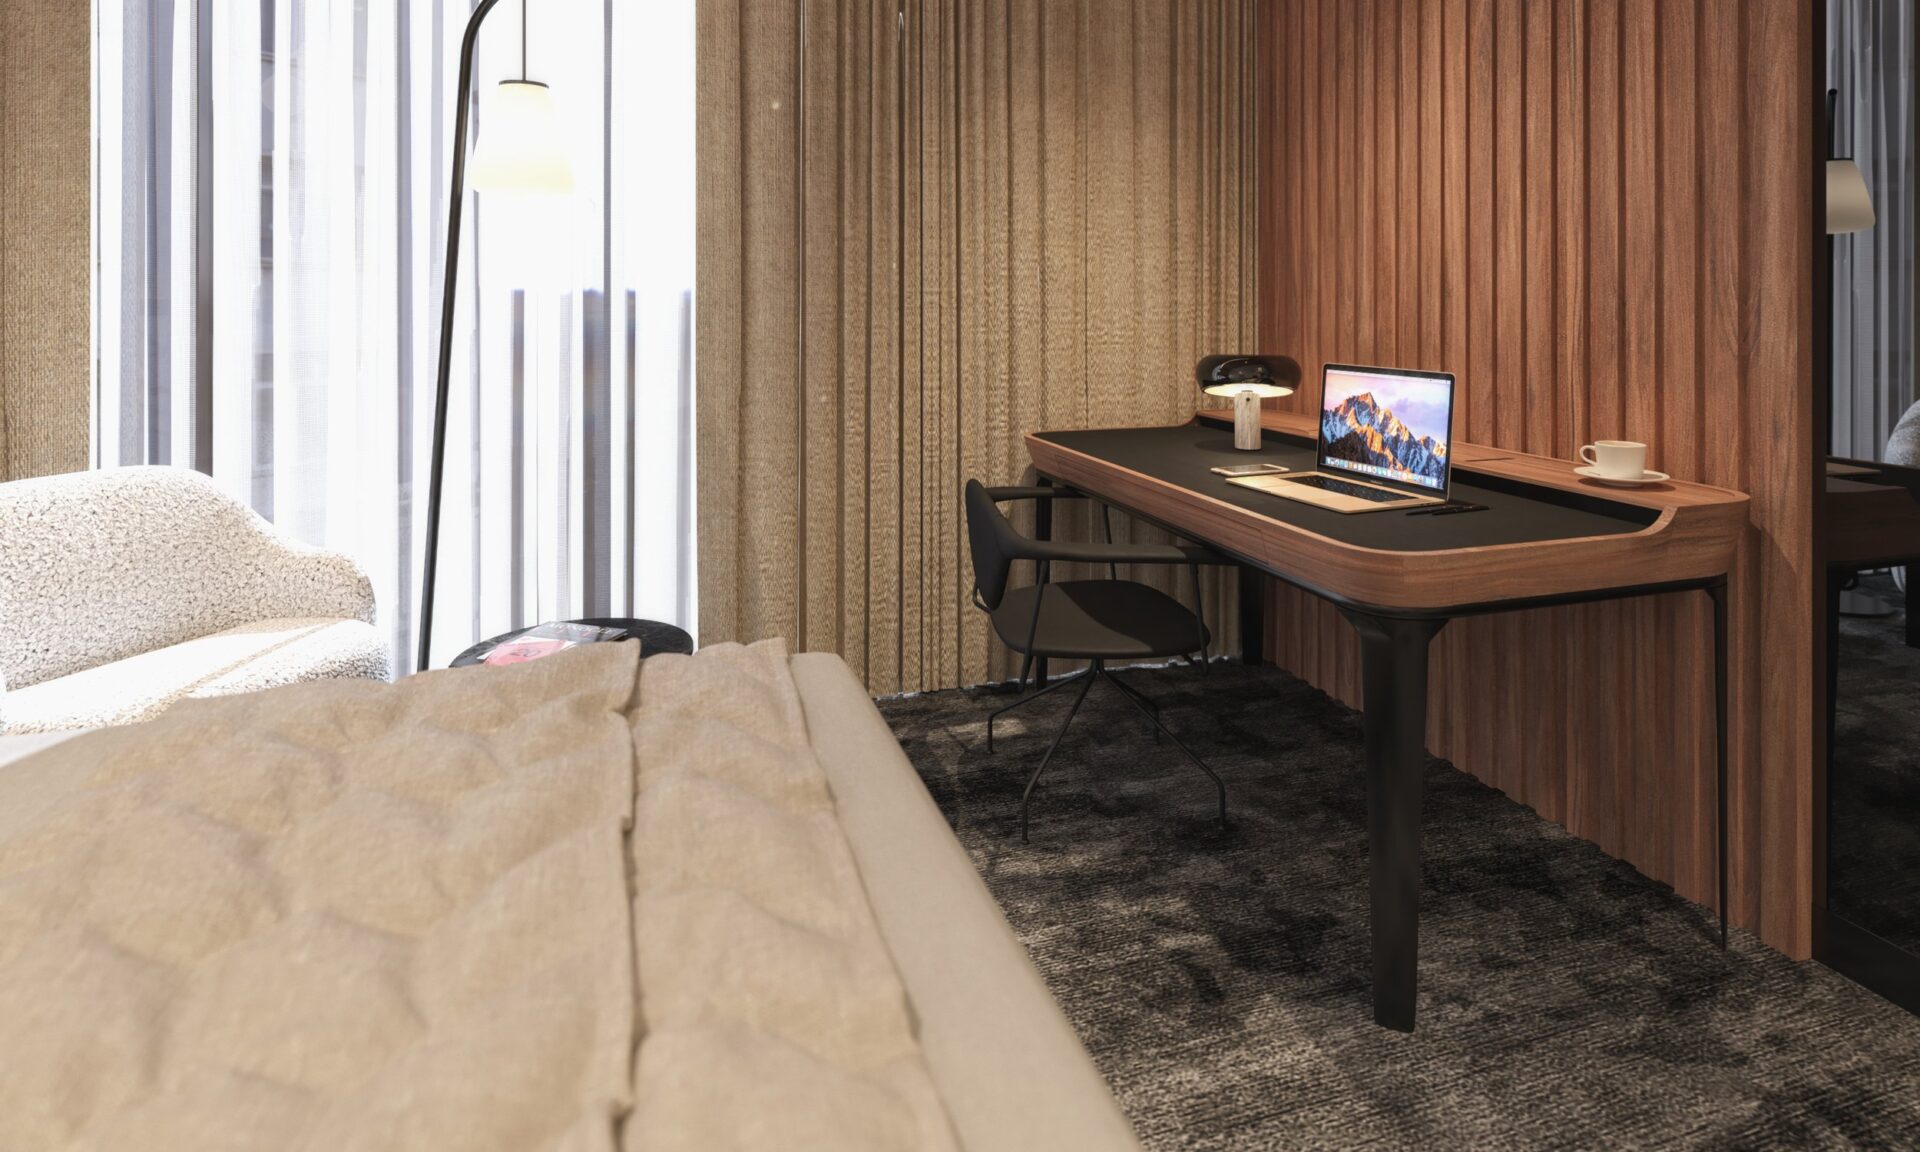 3D model of Movenpick Accor hotel bedroom interior design featuring a working desk and laptop